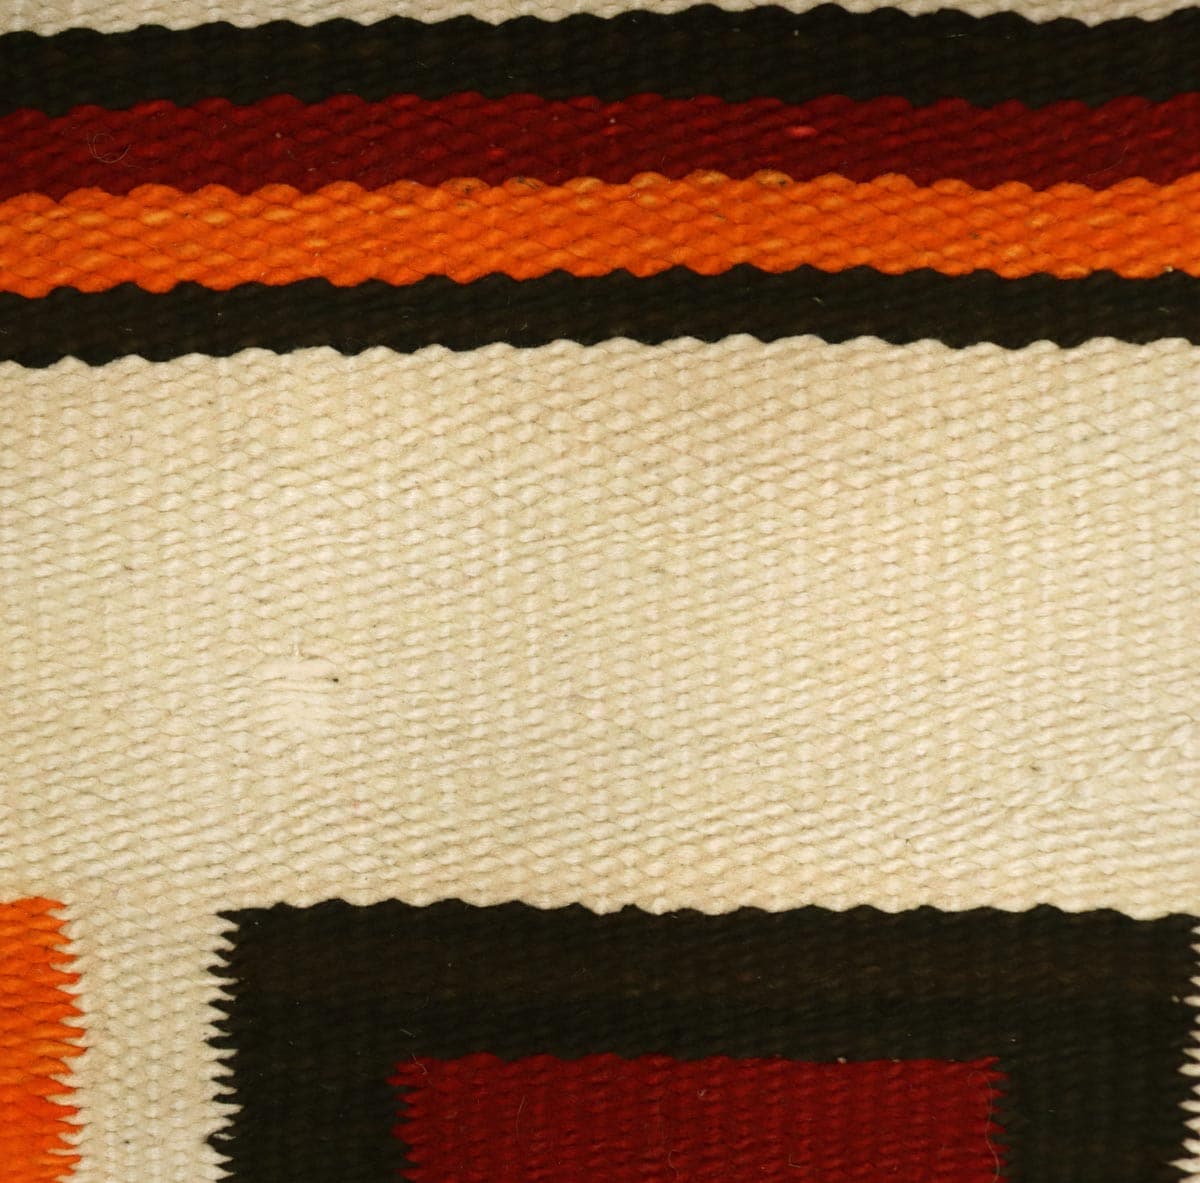 Navajo Banded Blanket c. 1900s, 58.5" x 36.5" (T90404A-1221-005) 4
